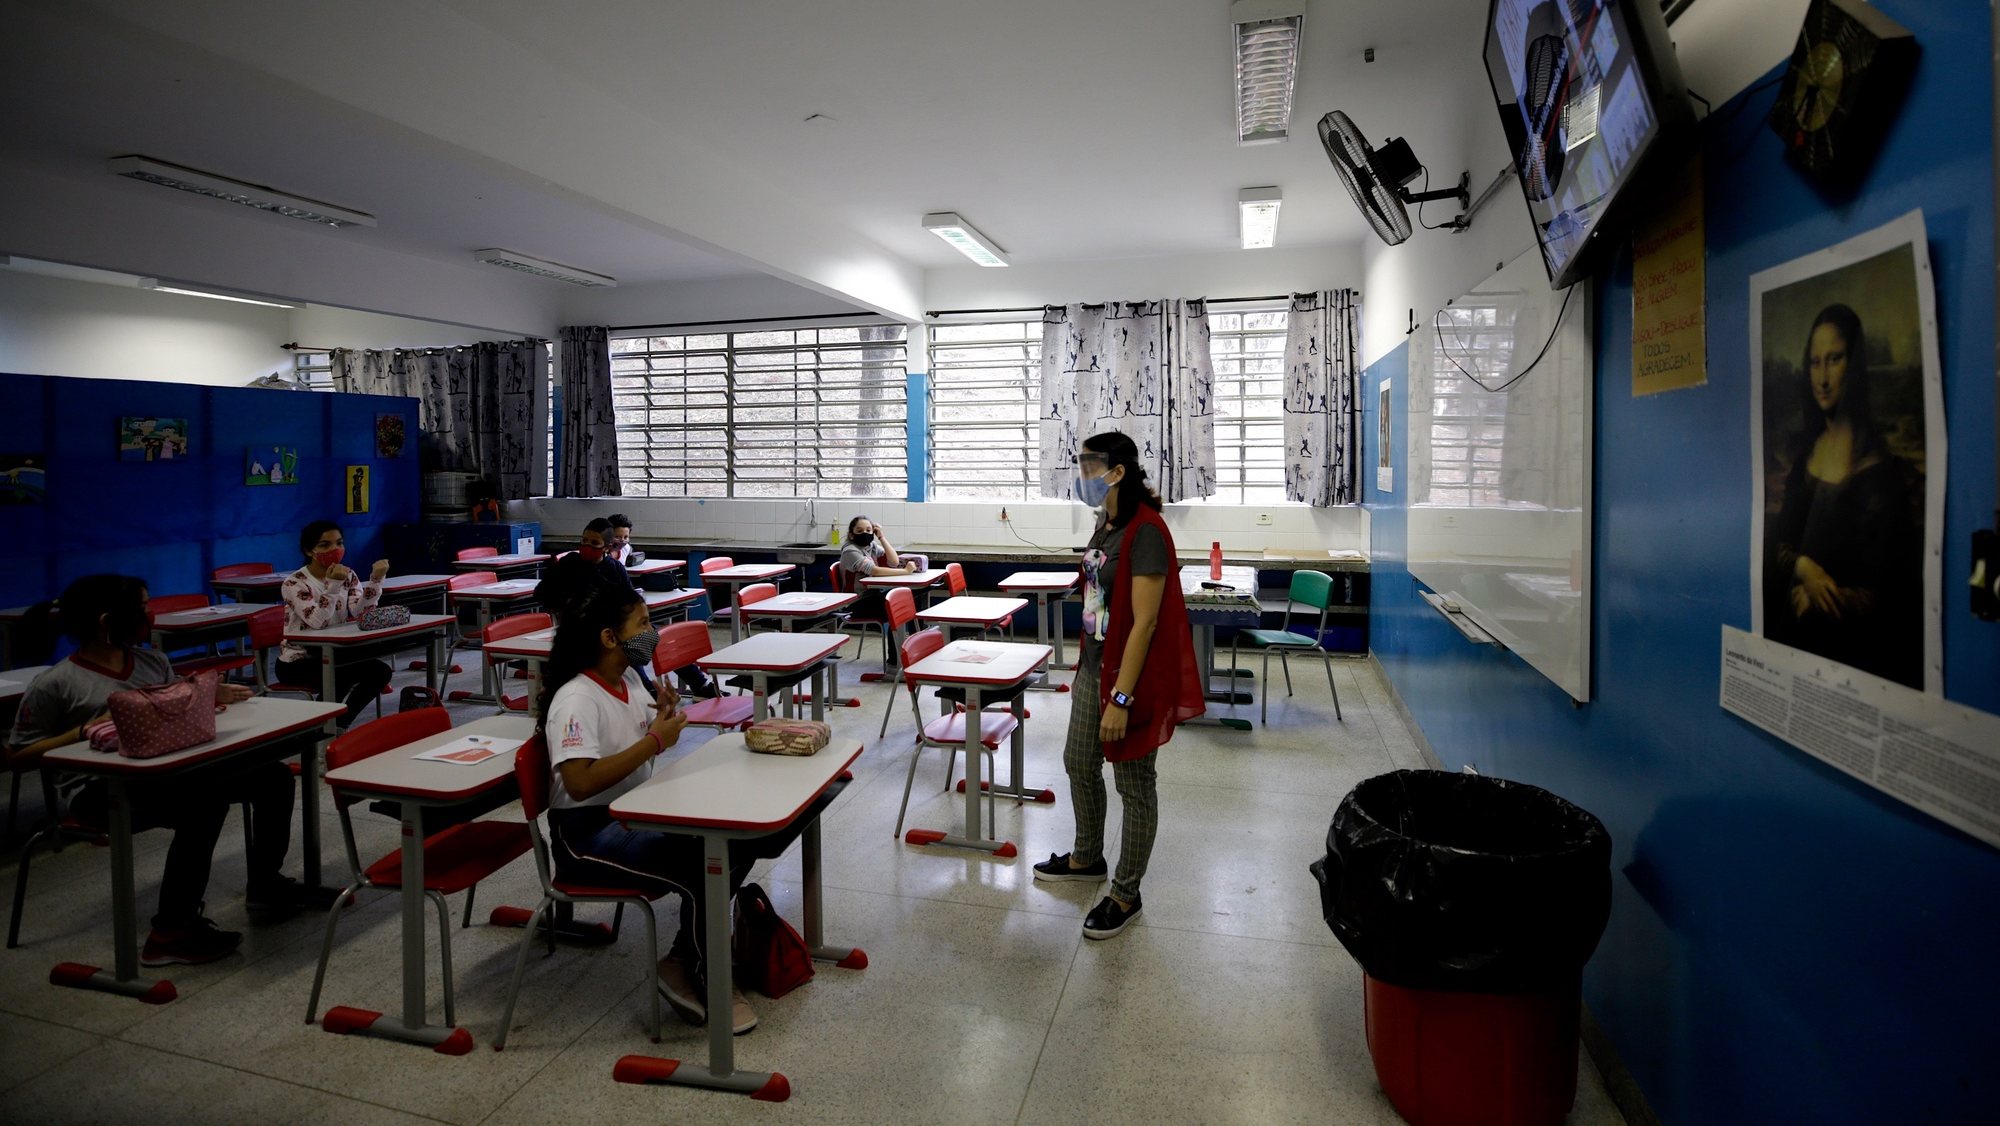 epa08996894 Children resume classes at the Raul Antonio Fragoso state school, in Sao Paulo, Brazil, 08 February 2021. Public schools in the state of Sao Paulo, the most populous in Brazil with 46 million inhabitants, resume face-to-face classes on 08 February after nearly a year of closure due to the pandemic, which currently continues to hit the country hard.  EPA/Fernando Bizerra